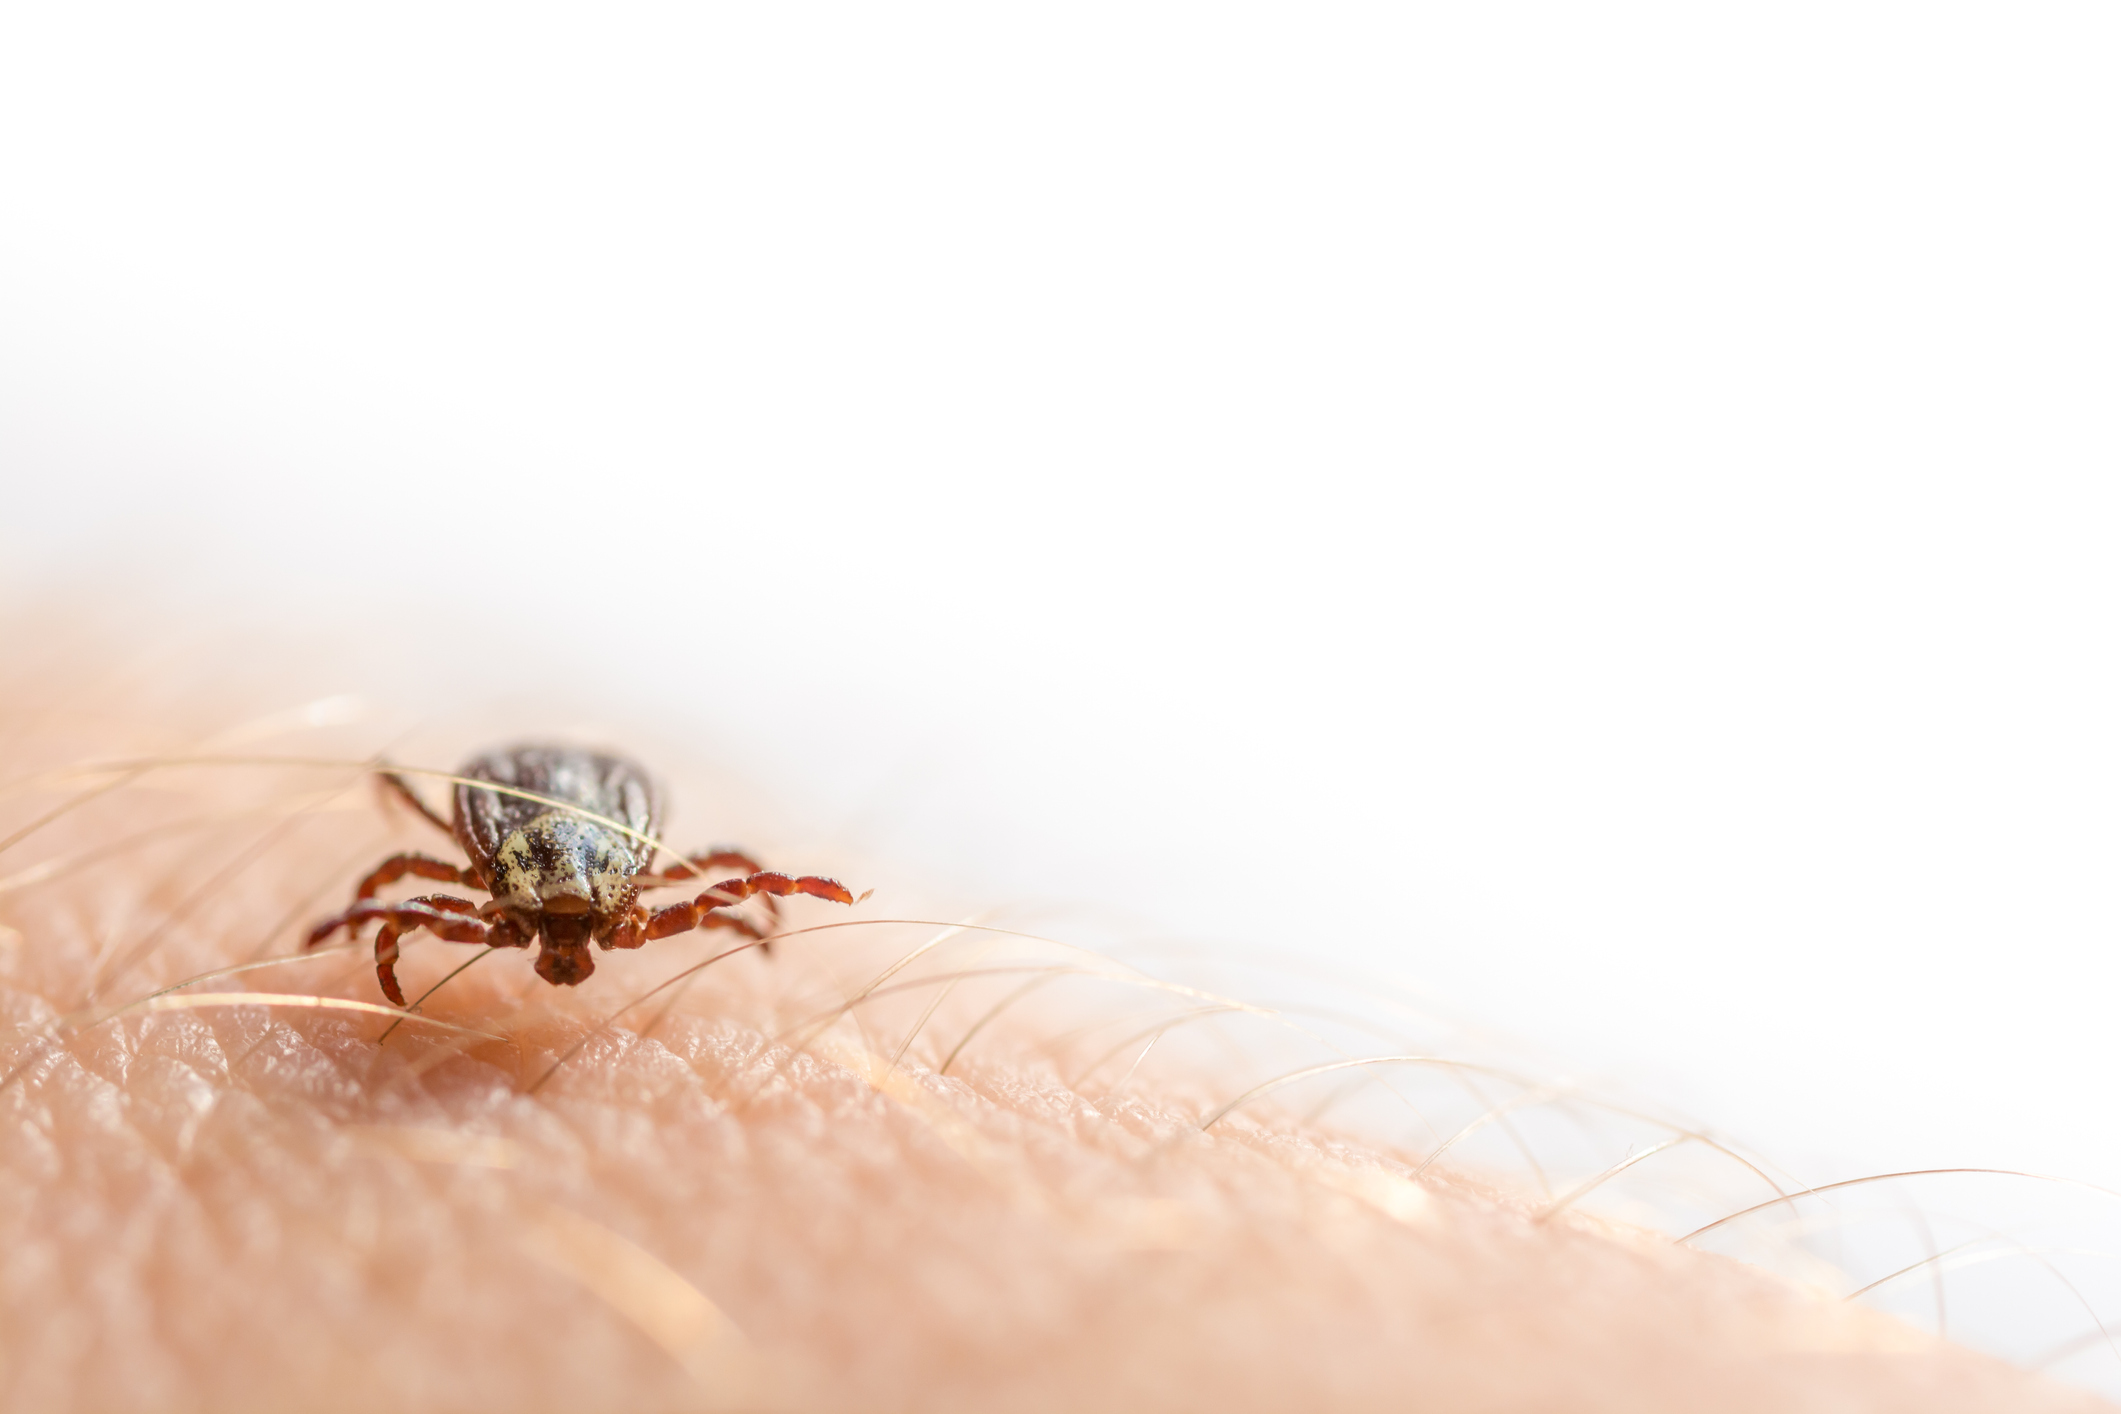 A tick crawls over the skin of a person's arm.